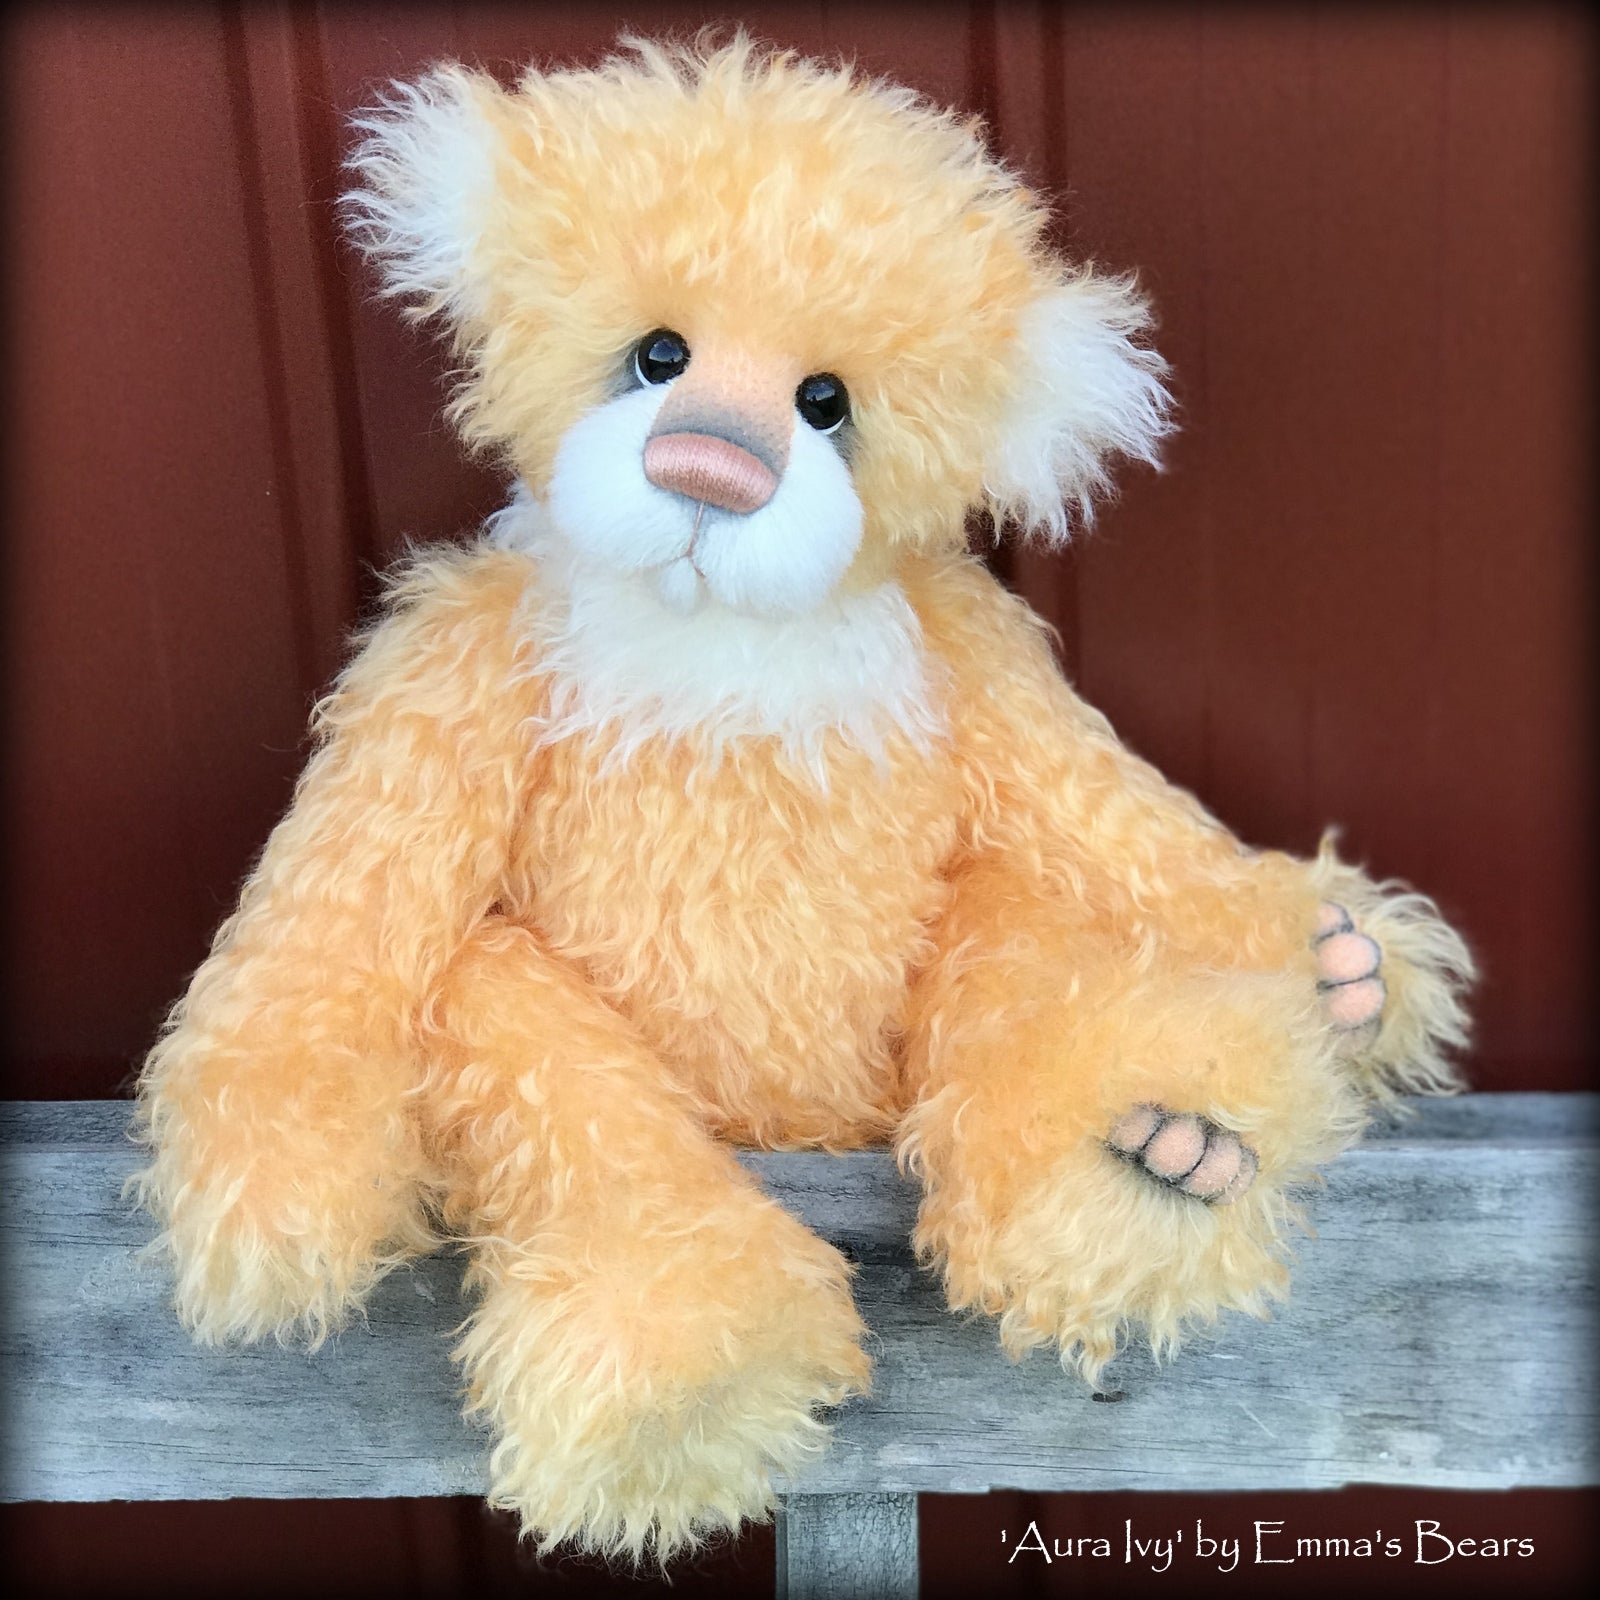 Toddler Aura Ivy - 17in hand-dyed MOHAIR Artist toddler style Bear by Emma's Bears - OOAK